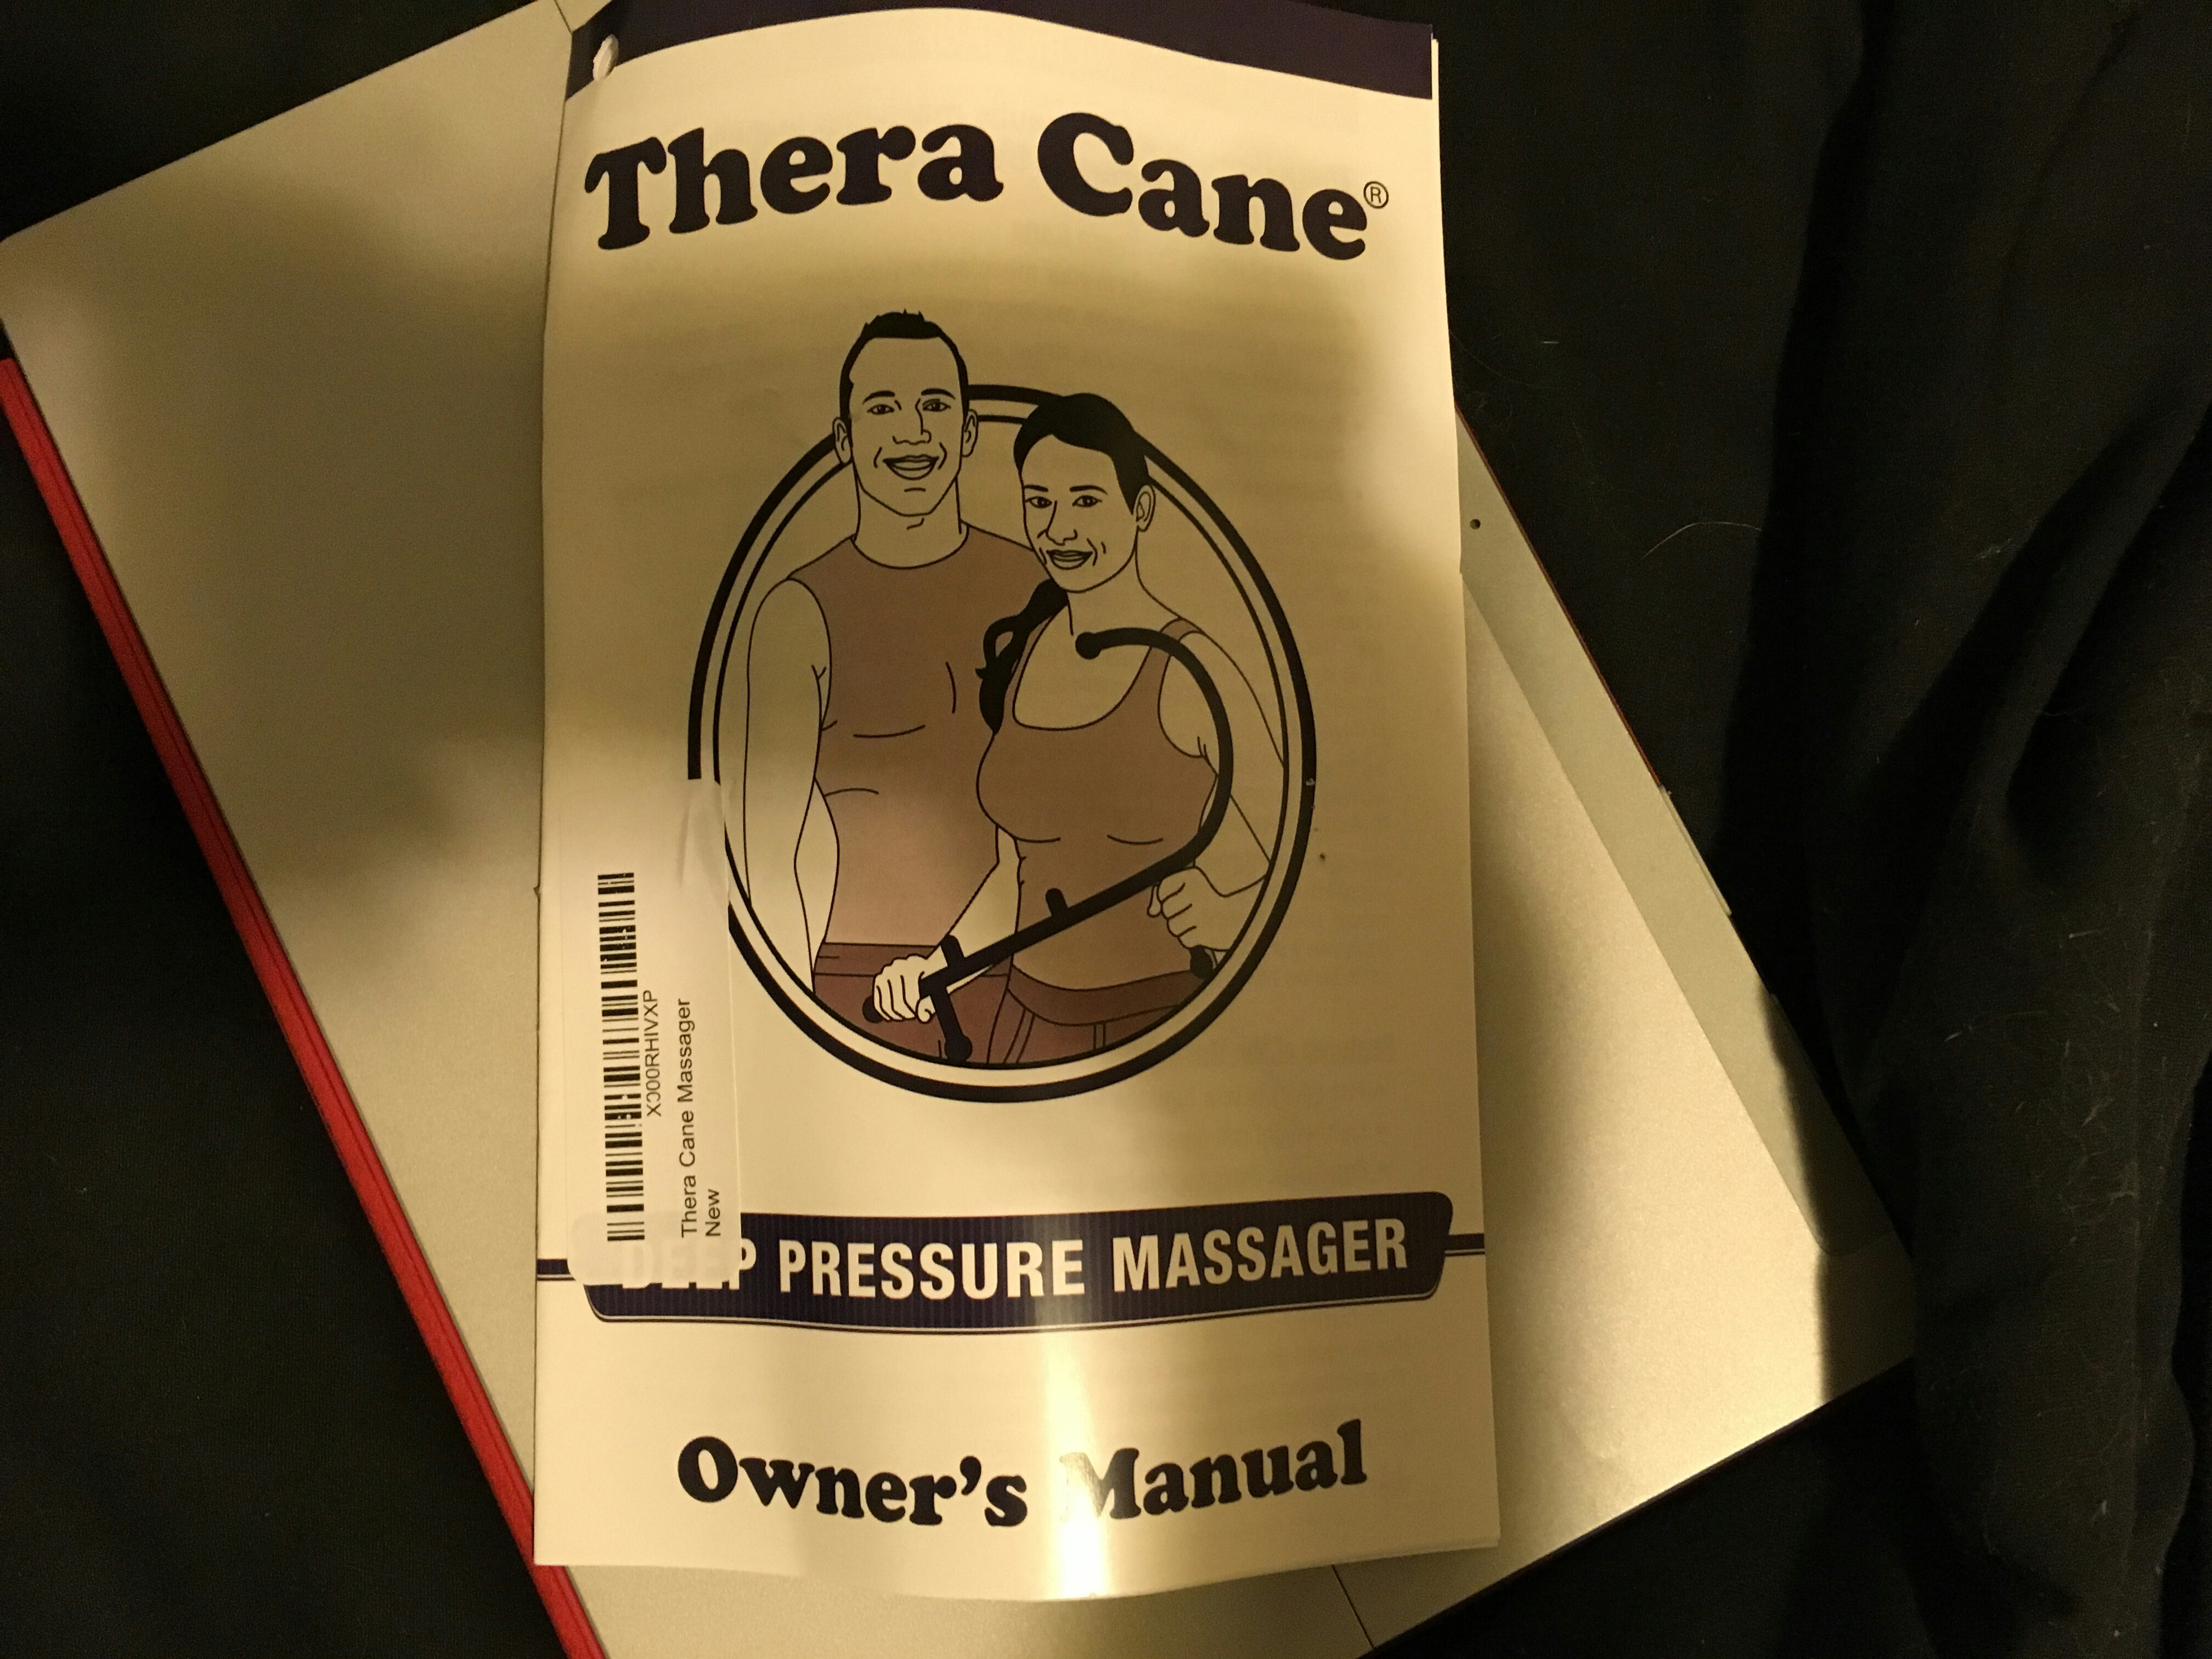 poster - Thera Cane Thern Care Manager Pressure Massager Owner's lanual